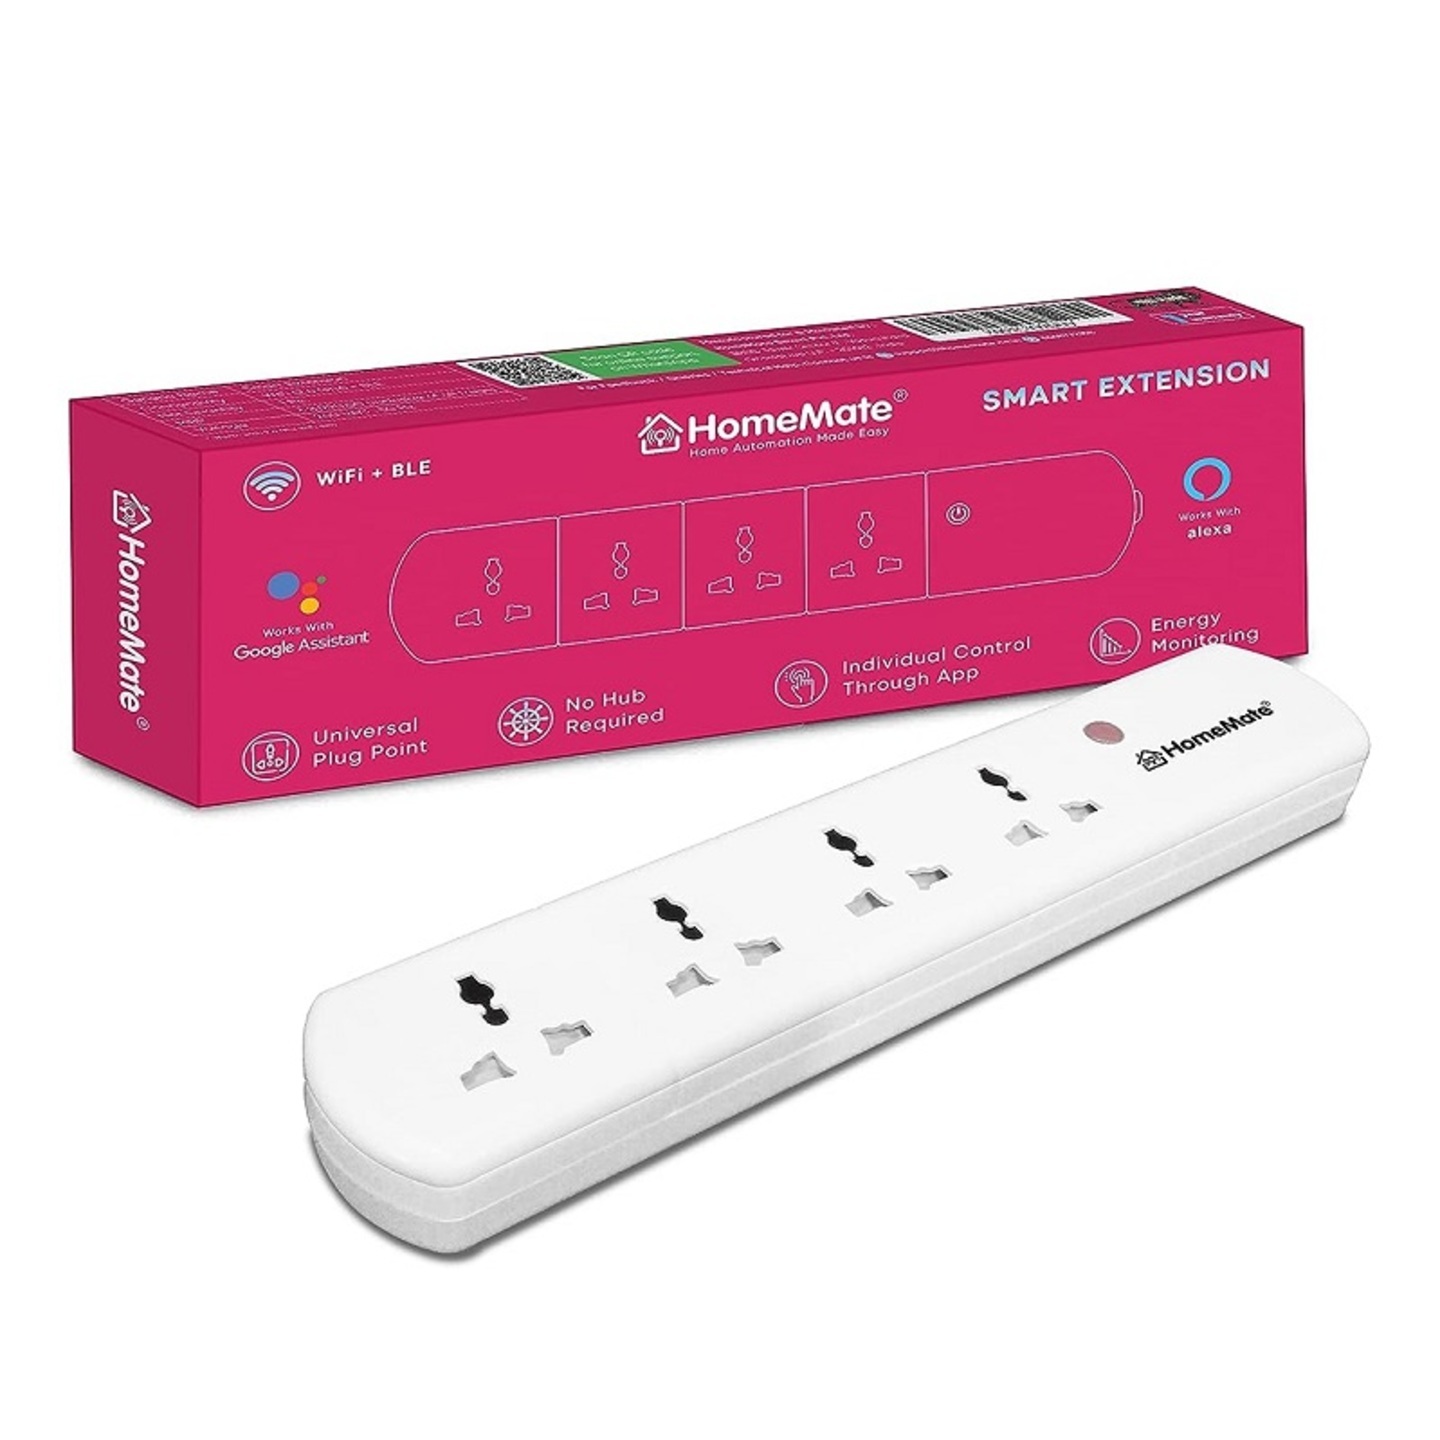 HomeMate WiFi + BLE Smart Power Extension With Energy Monitoring (Works with Amazon Alexa and Google home)